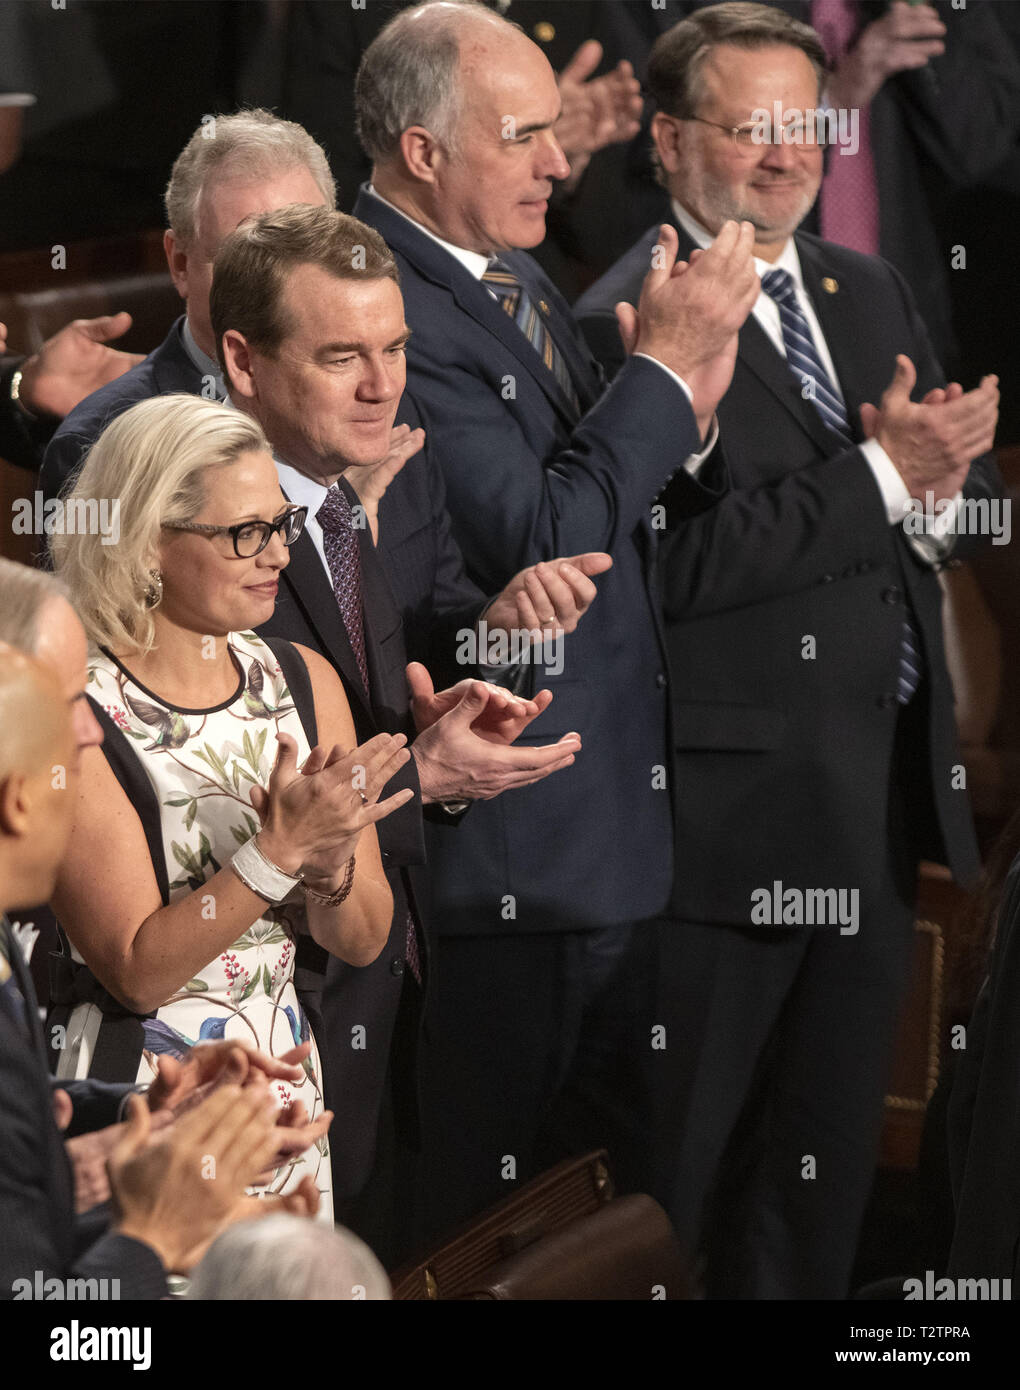 Washington, District of Columbia, USA. 3rd Apr, 2019. From left to right: United States Senator Kyrsten Sinema (Democrat of Arizona), US Senator Michael F. Bennet (Democrat of Colorado), US Senator Bob Casey, Jr. (Democrat of Pennsylvania), and US Senator Gary Peters (Democrat of Michigan) applaud as Jens Stoltenberg, Secretary General of the North Atlantic Treaty Organization (NATO) arrives to address a joint session of the United States Congress in the US Capitol in Washington, DC on Wednesday, April 3, 2019 Credit: Ron Sachs/CNP/ZUMA Wire/Alamy Live News Stock Photo